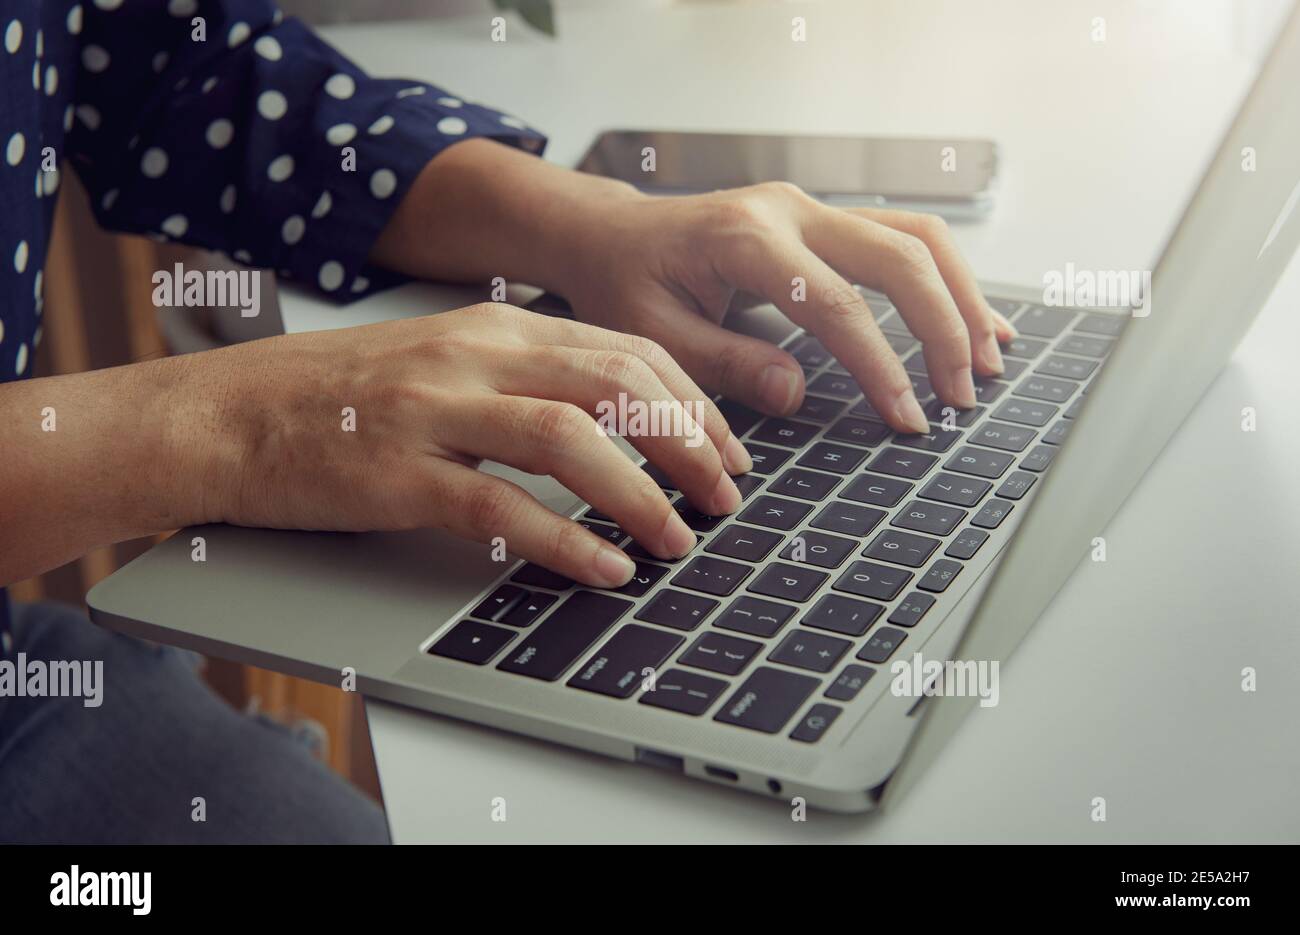 Woman's hand using a keyboard on a laptop computer. Business concept. Work from home. Stock Photo